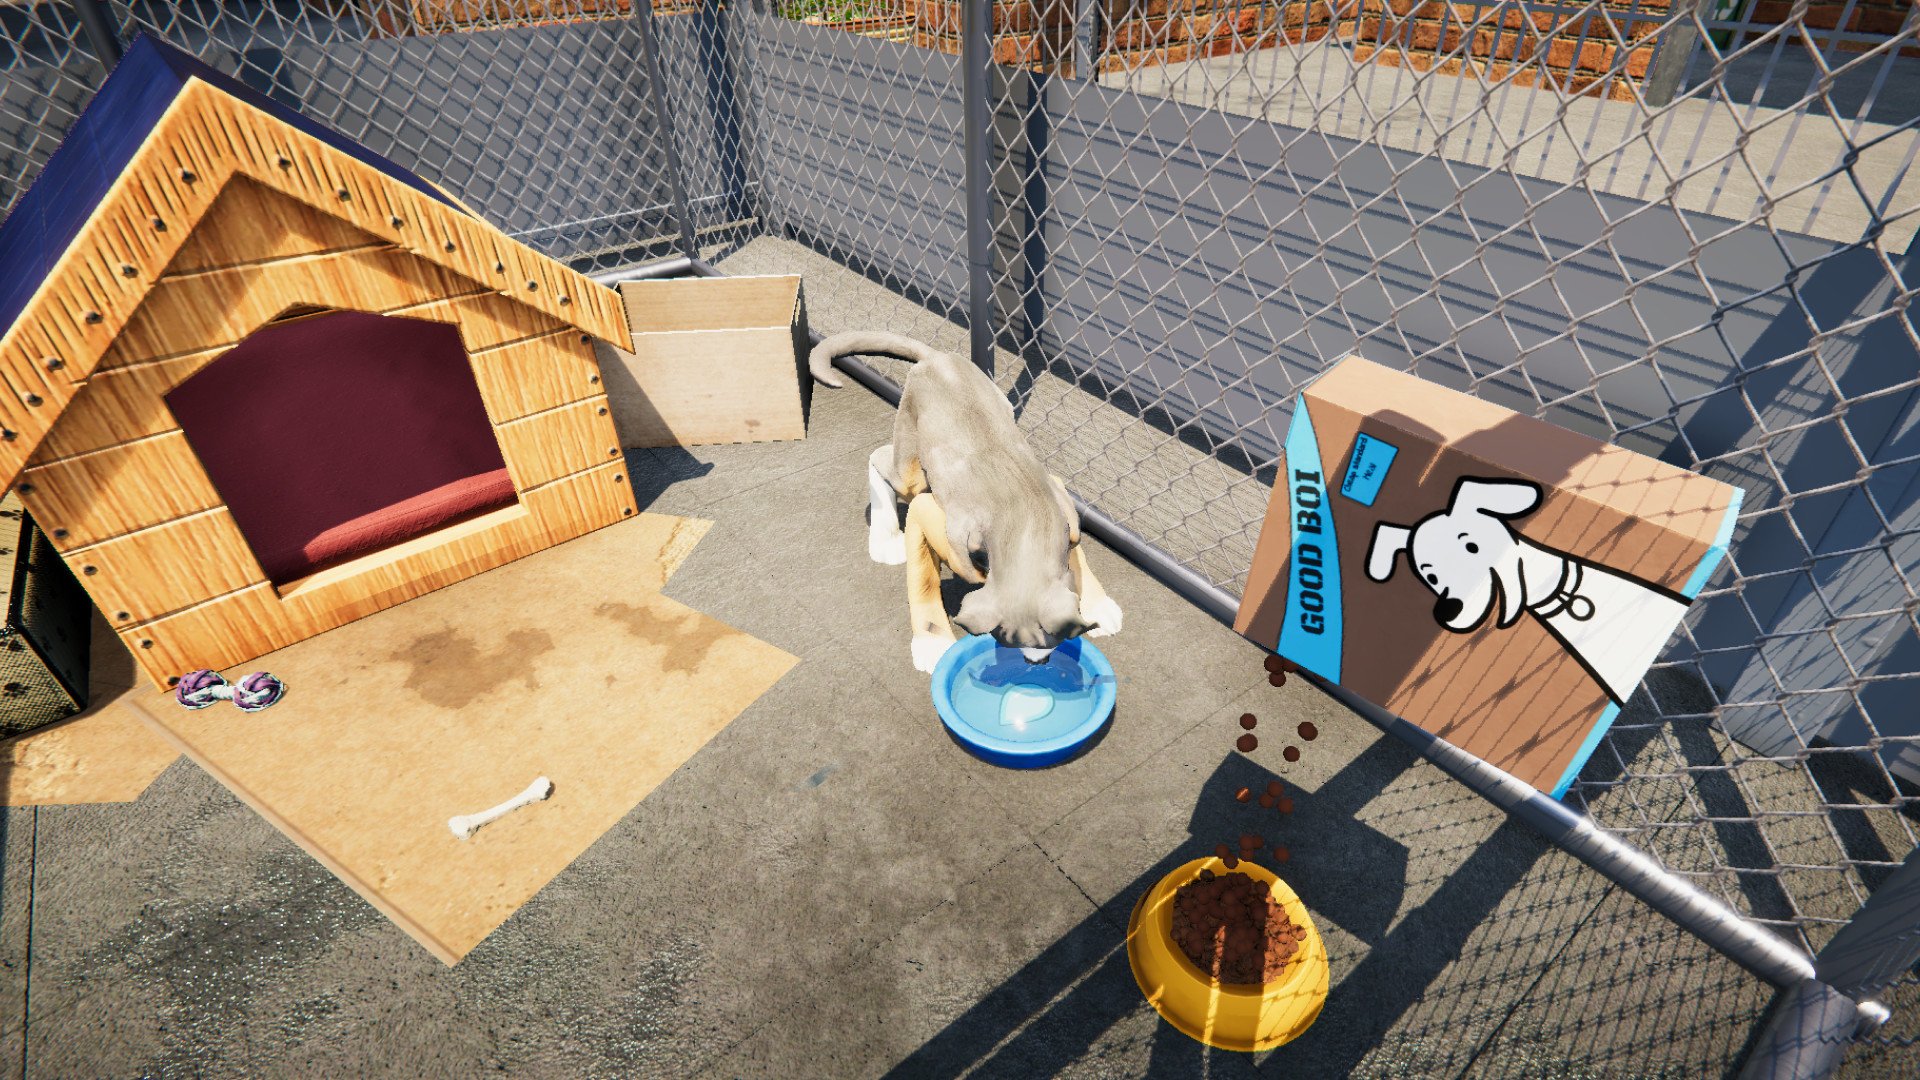 Animal Shelter Free Download for PC